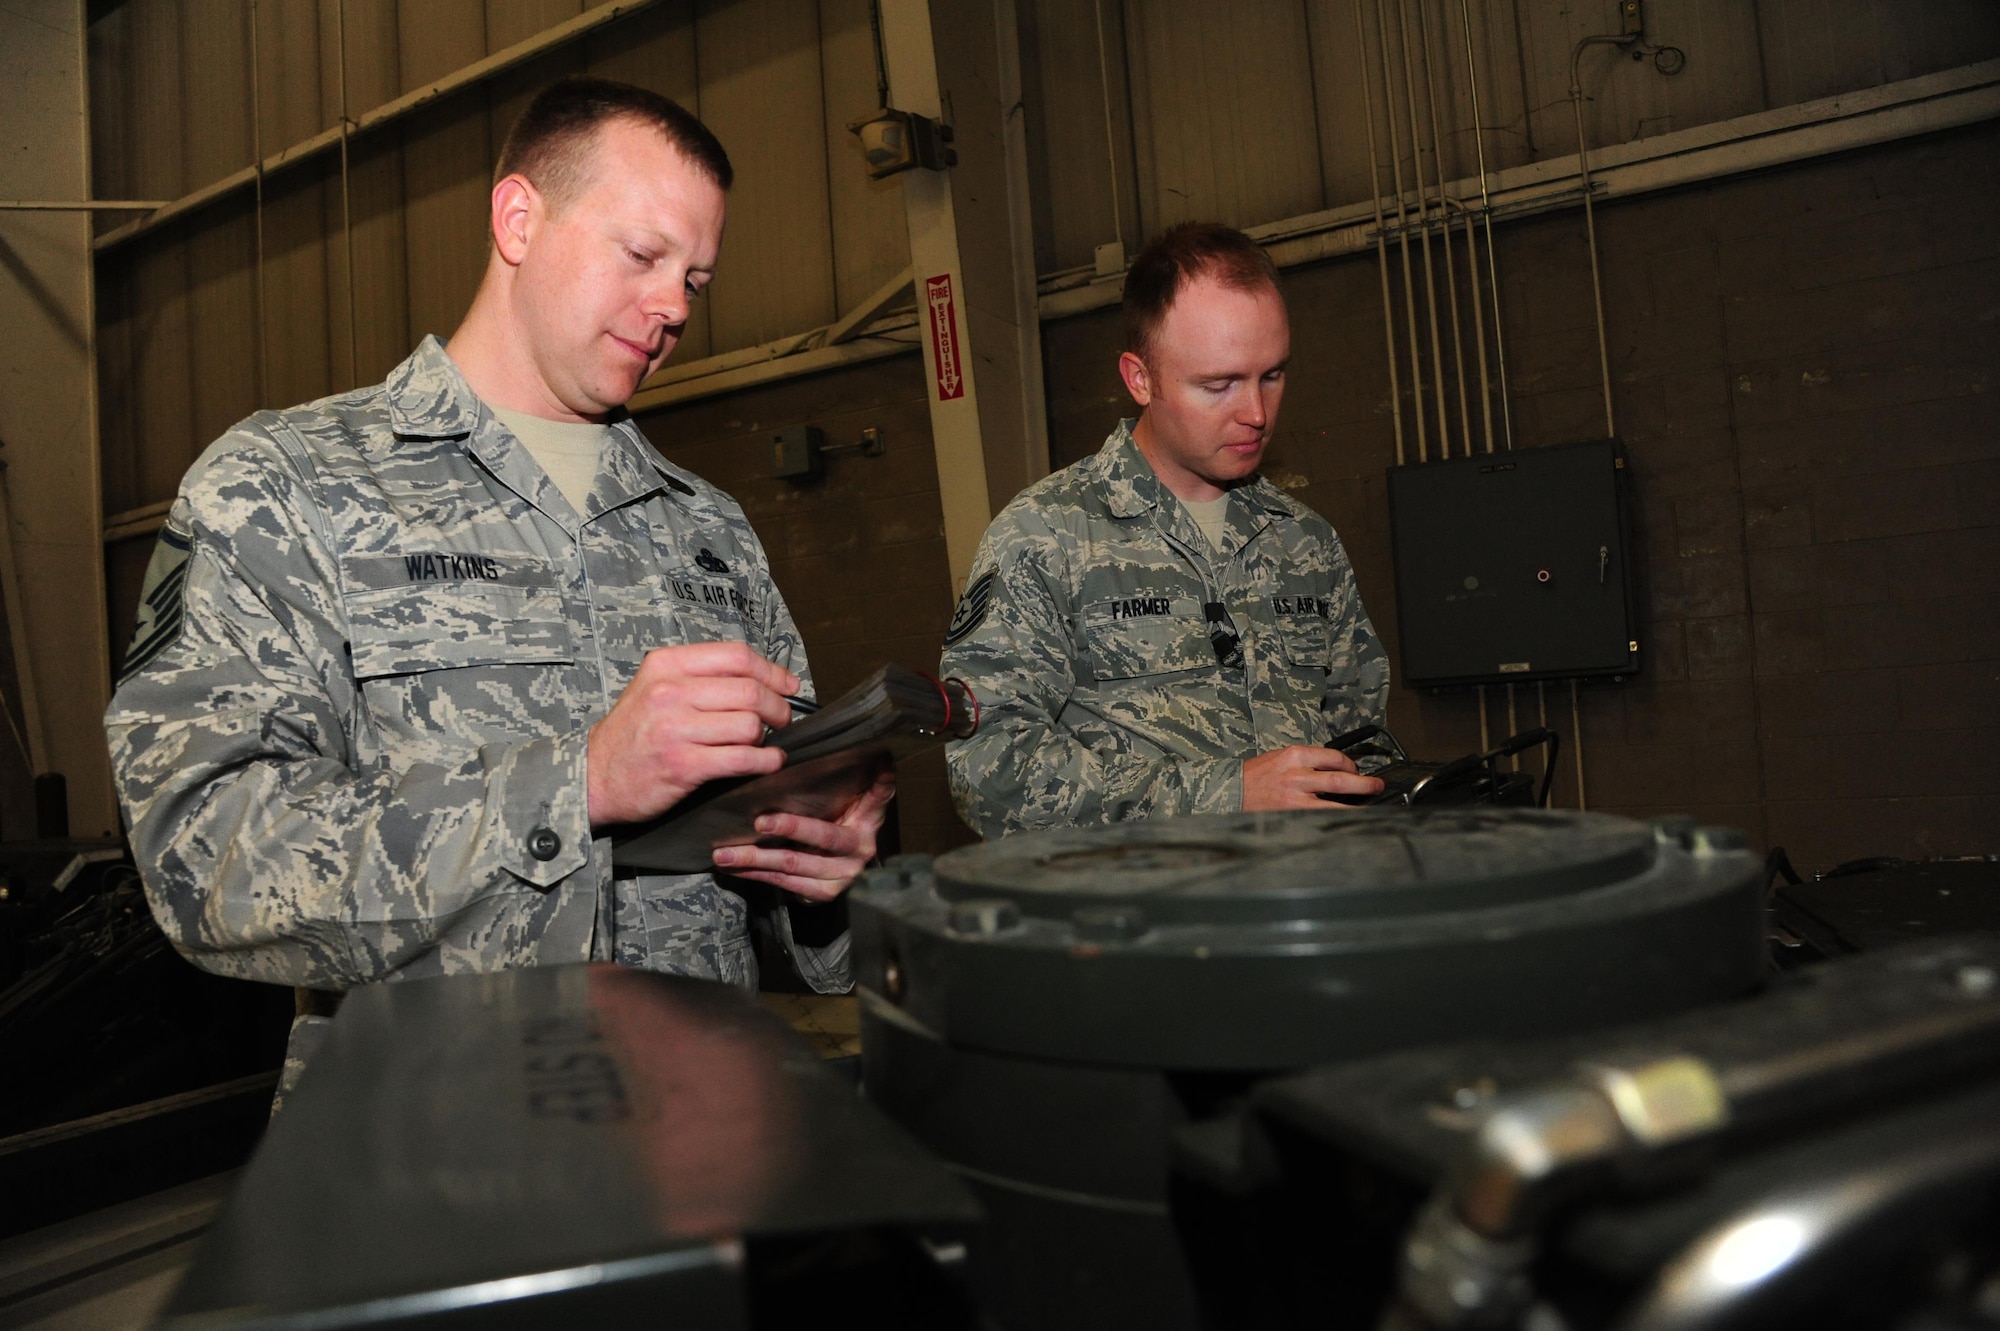 U.S. Air Force Master Sgt. Caleb Watkins, left, and Tech. Sgt. Jaime Farmer, both aircraft armament systems technicians assigned to the 131st Aircraft Maintenance Squadron (AMXS), prep a munitions handling unit (MHU)-204 trailer for loading procedures at Whiteman Air Force Base, Mo., April 14, 2016, Watkins and Farmer are two of three 131st AMXS drill-status guardsmen who loaded weapons to the B-2 Spirit during an exercise for the time during CONSTANT VIGILANCE 16. (U.S. Air Force photo by Airman 1st Class Keenan Berry)